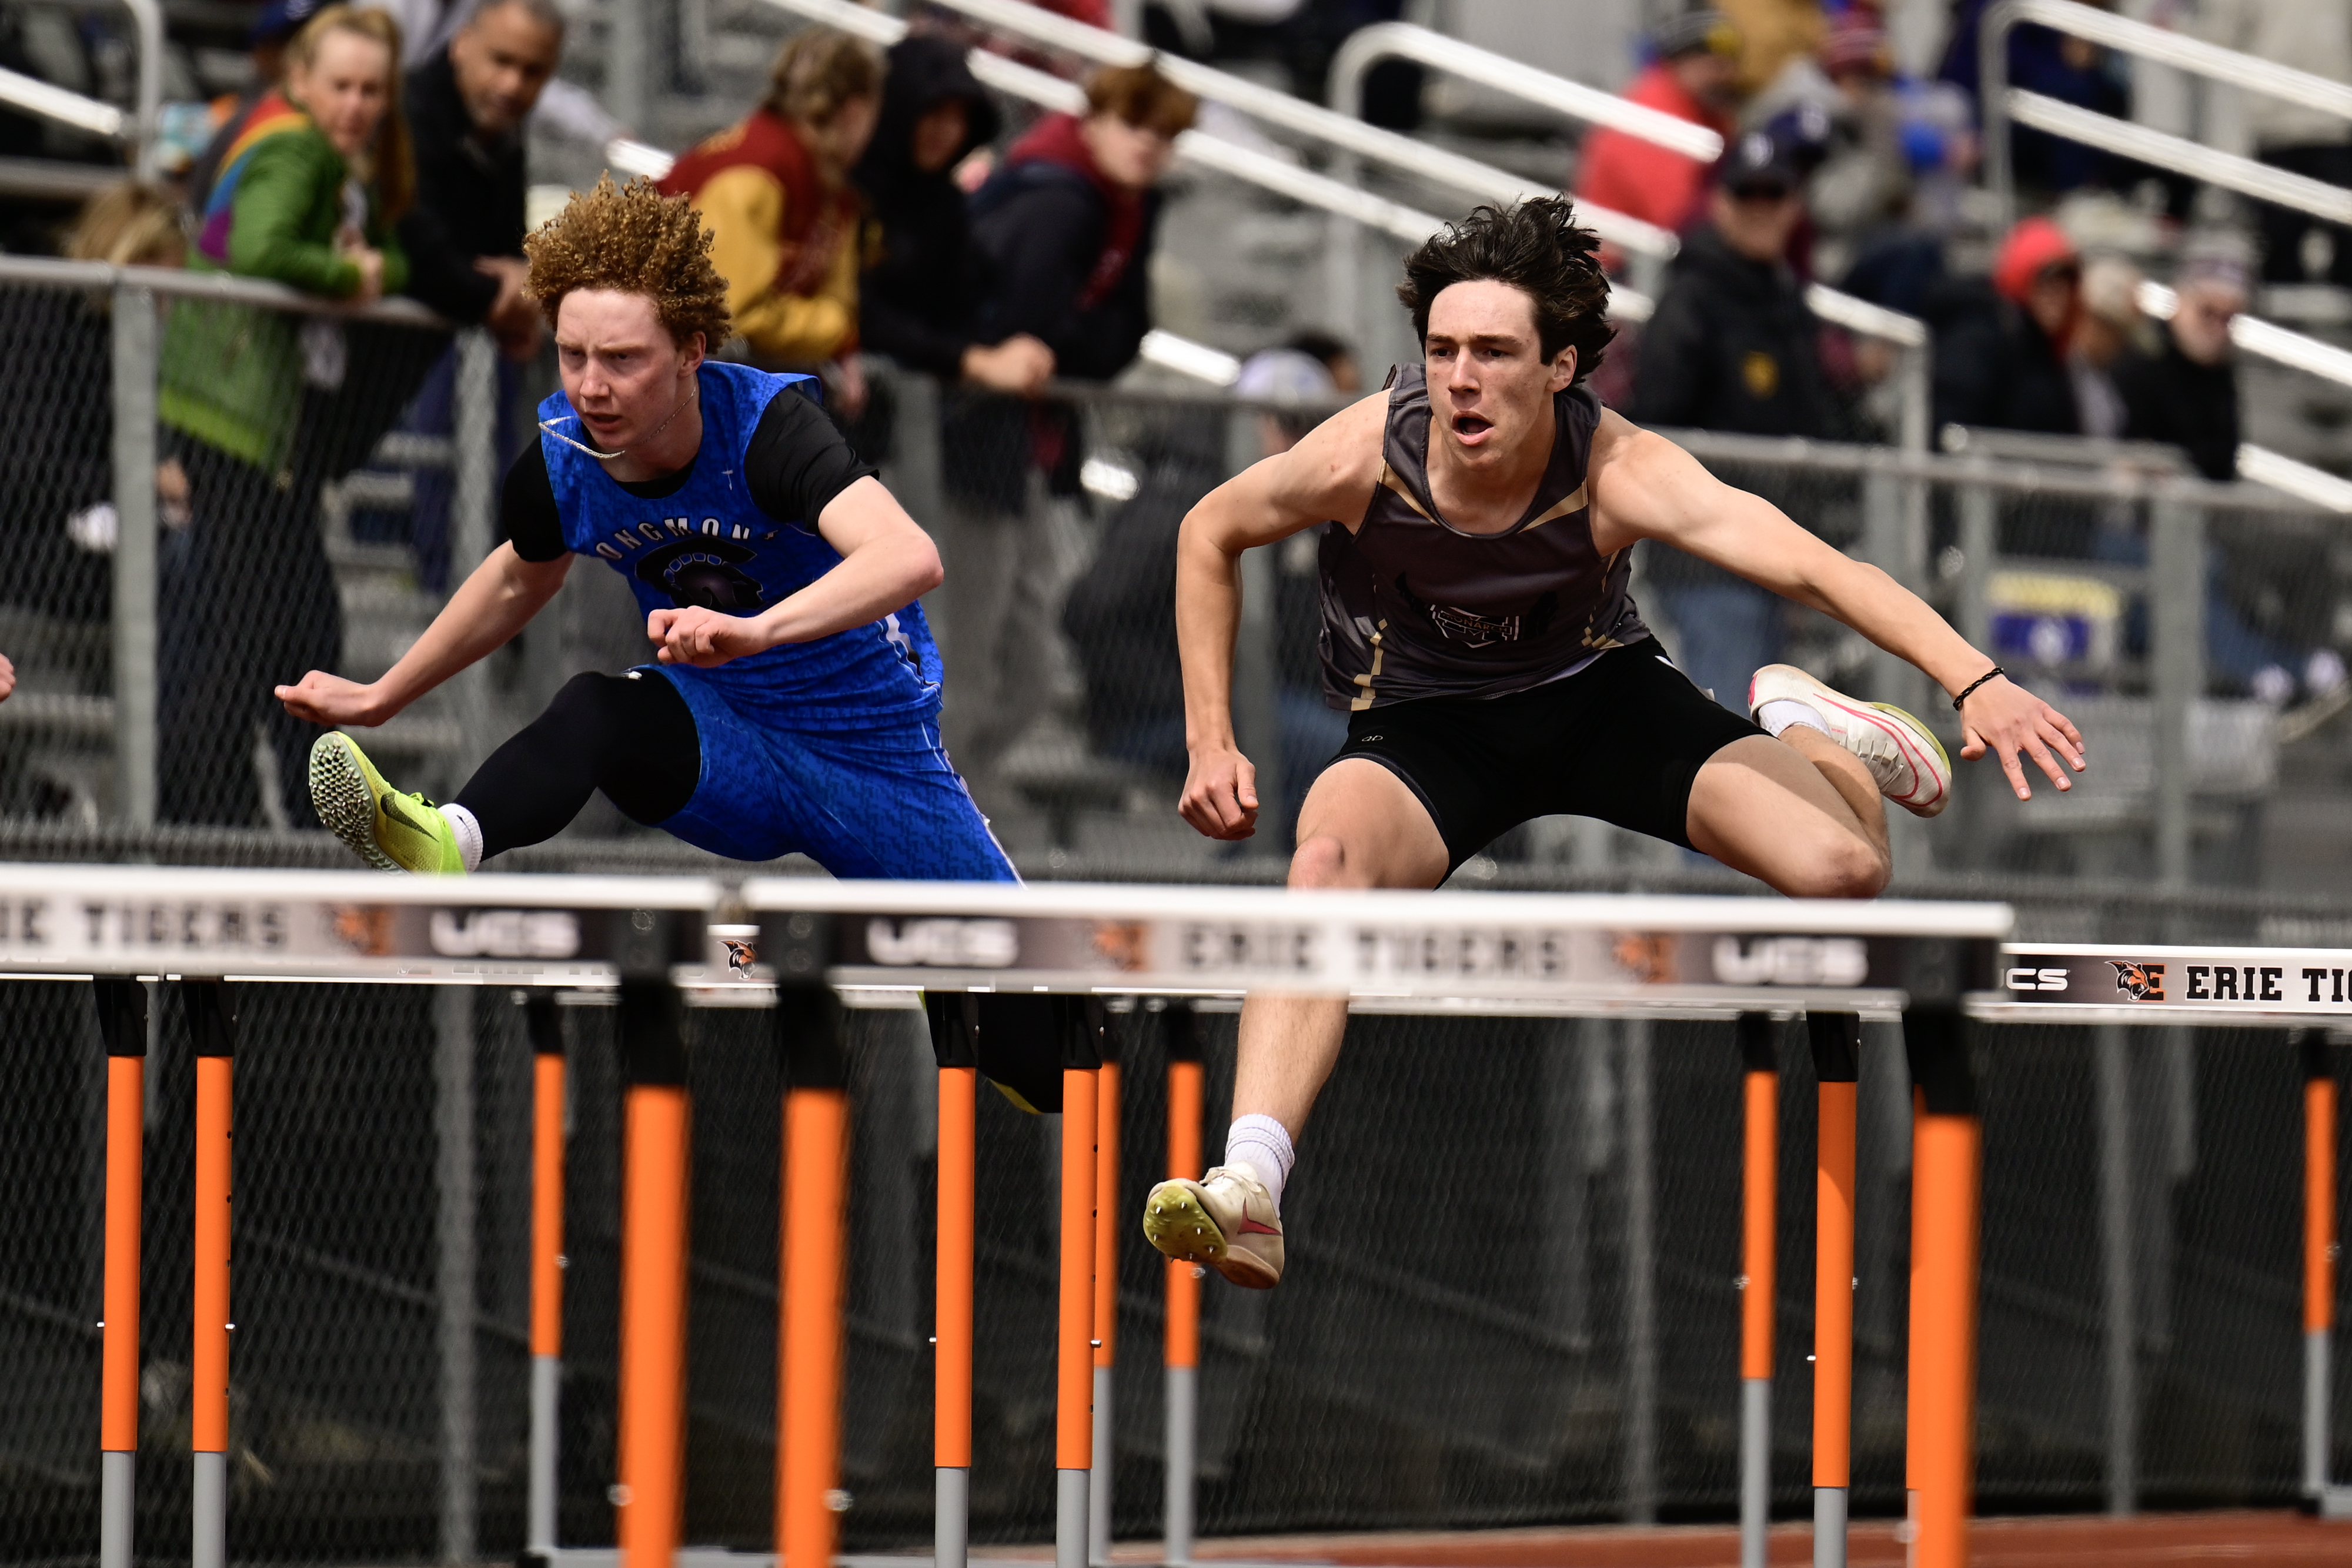 From left: Longmont's Malcom Teagan and Monarch's Brek Hoenninger race to the finish in the 110 Meter Hurdles race at the Erie Twilight Invitational track and field meet on Friday, March 29, 2024. (Matthew Jonas/Staff Photographer)